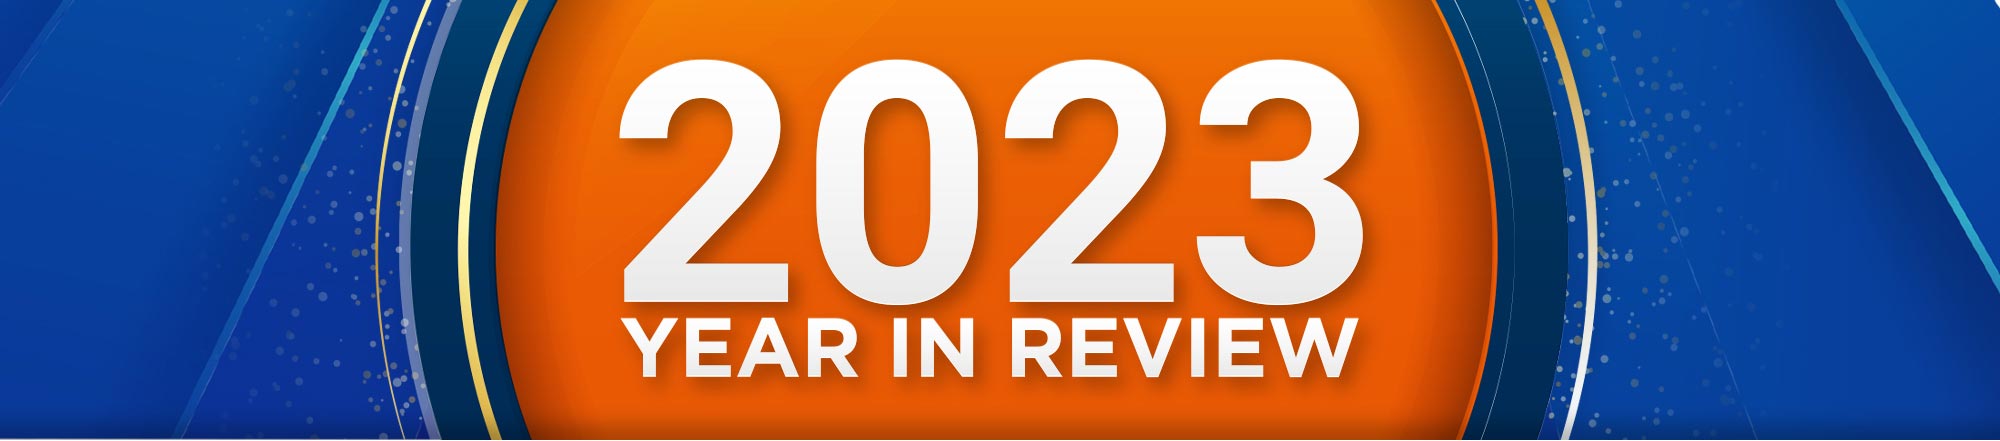 2023 Year in Review header